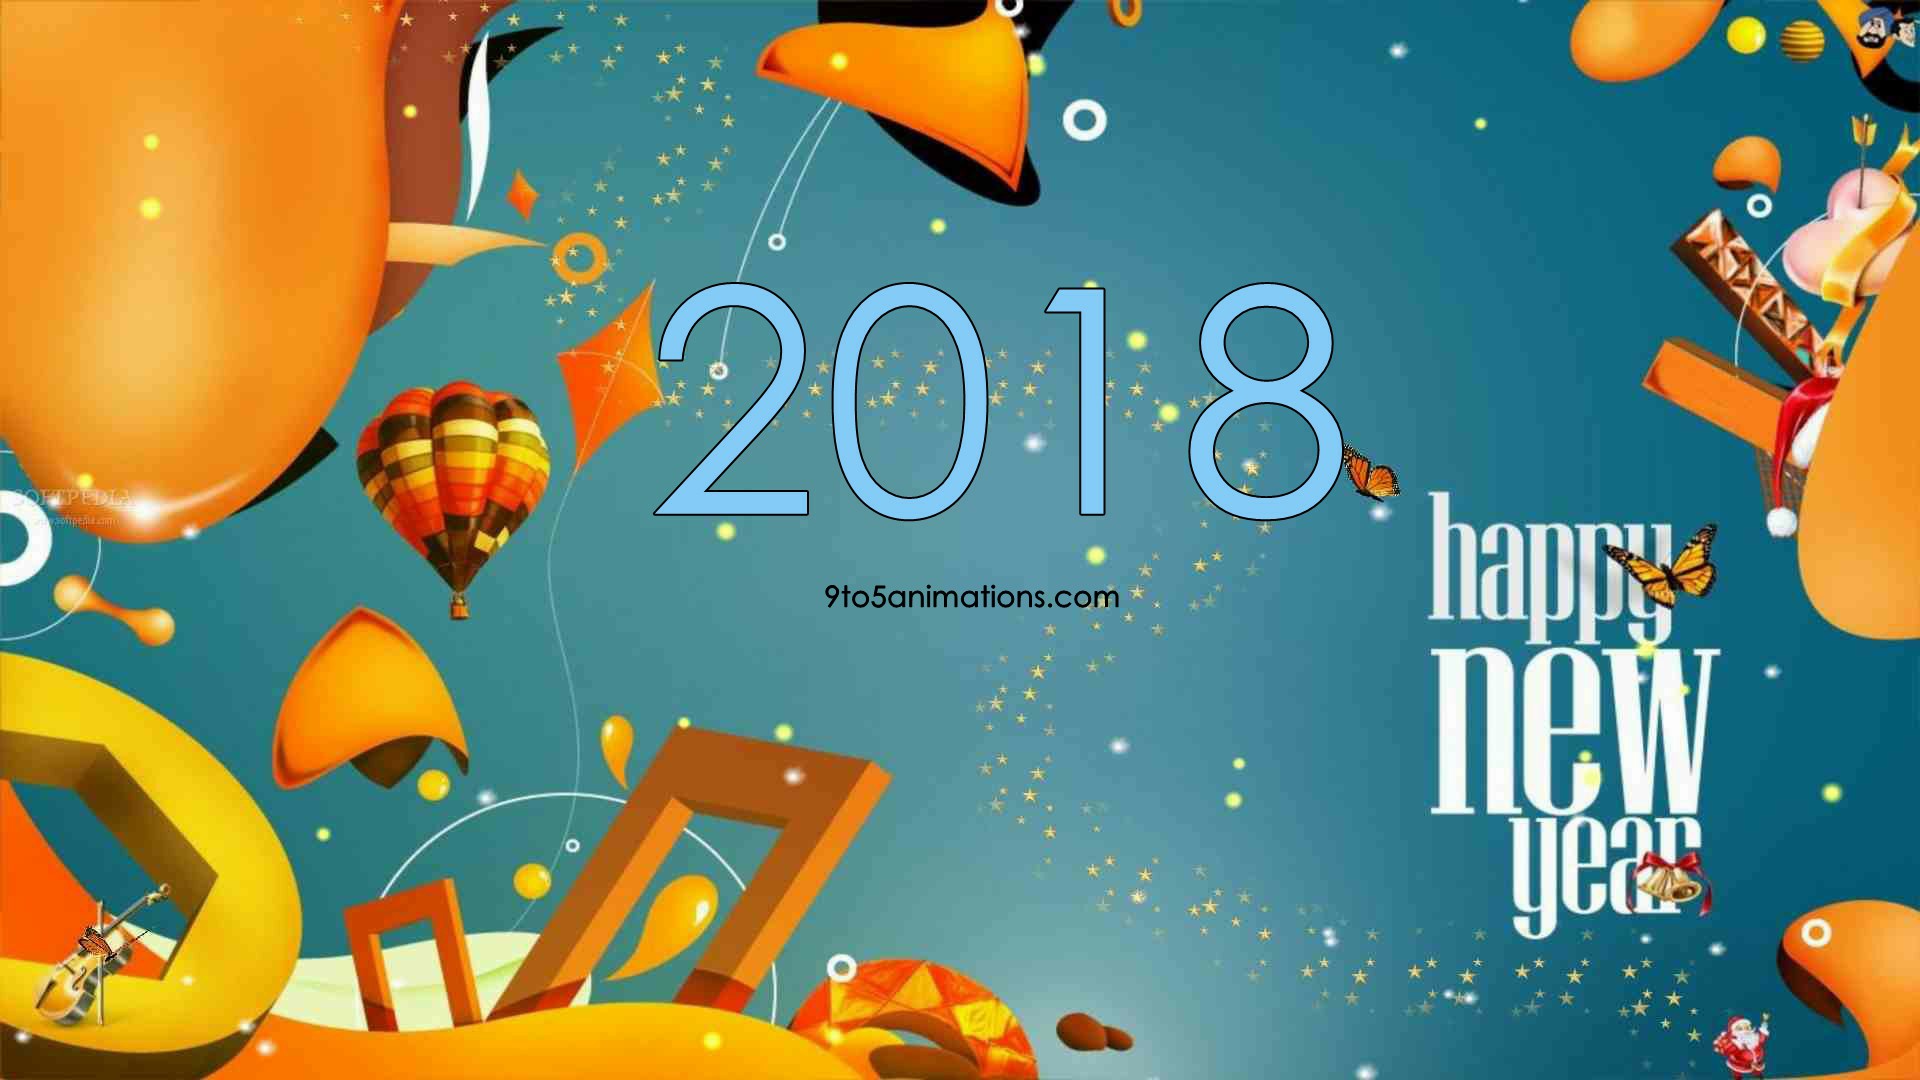 New Year HD Wallpaper 9to5animations